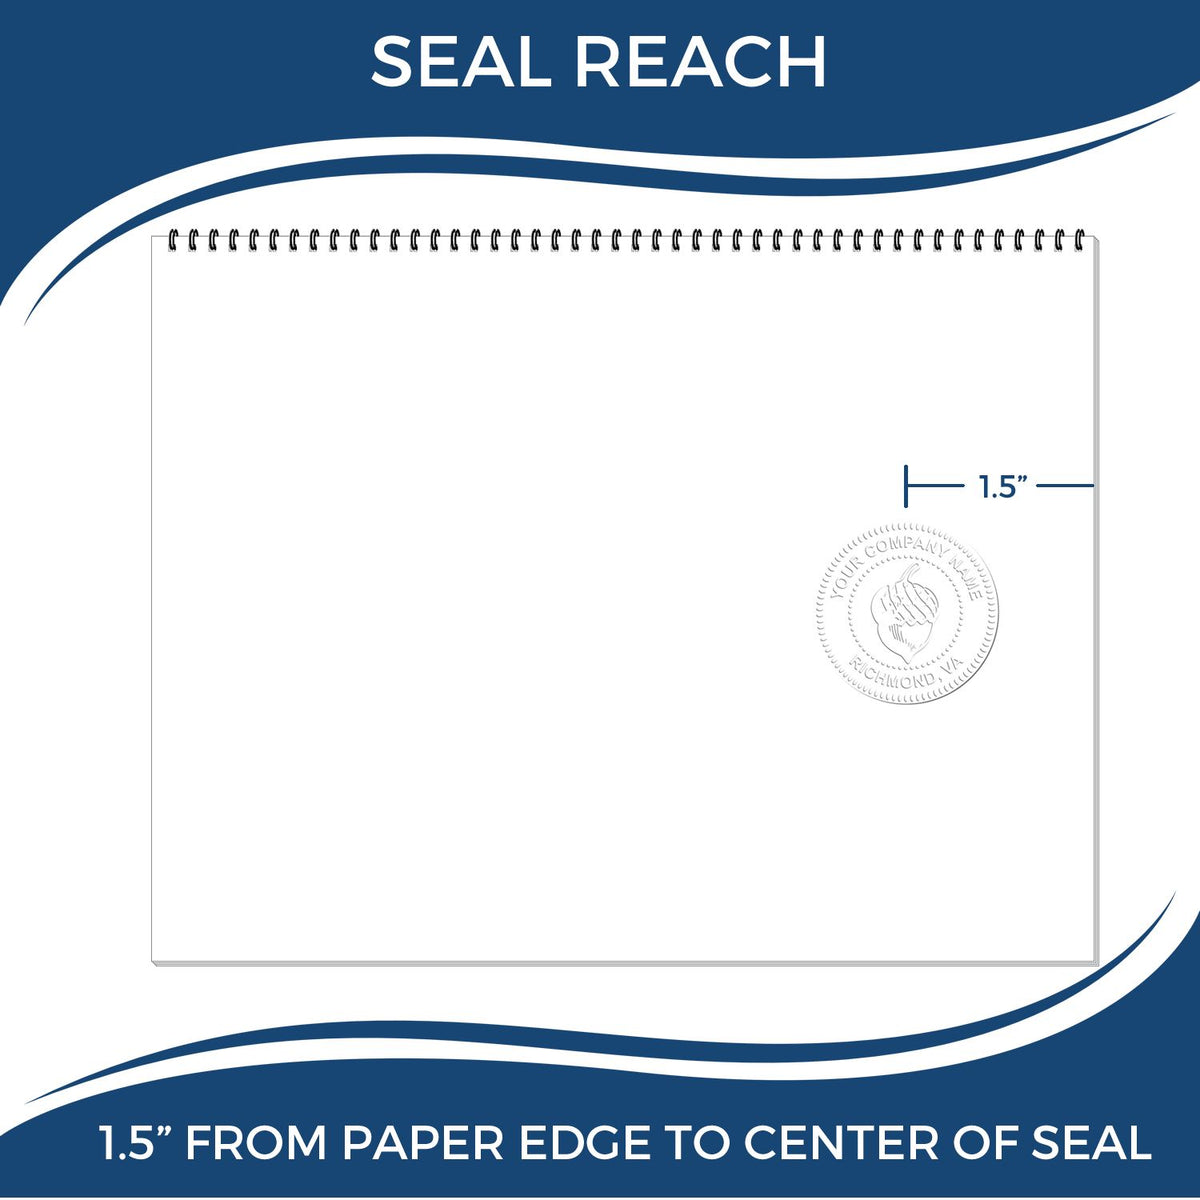 An infographic showing the seal reach which is represented by a ruler and a miniature seal image of the Gift Georgia Architect Seal